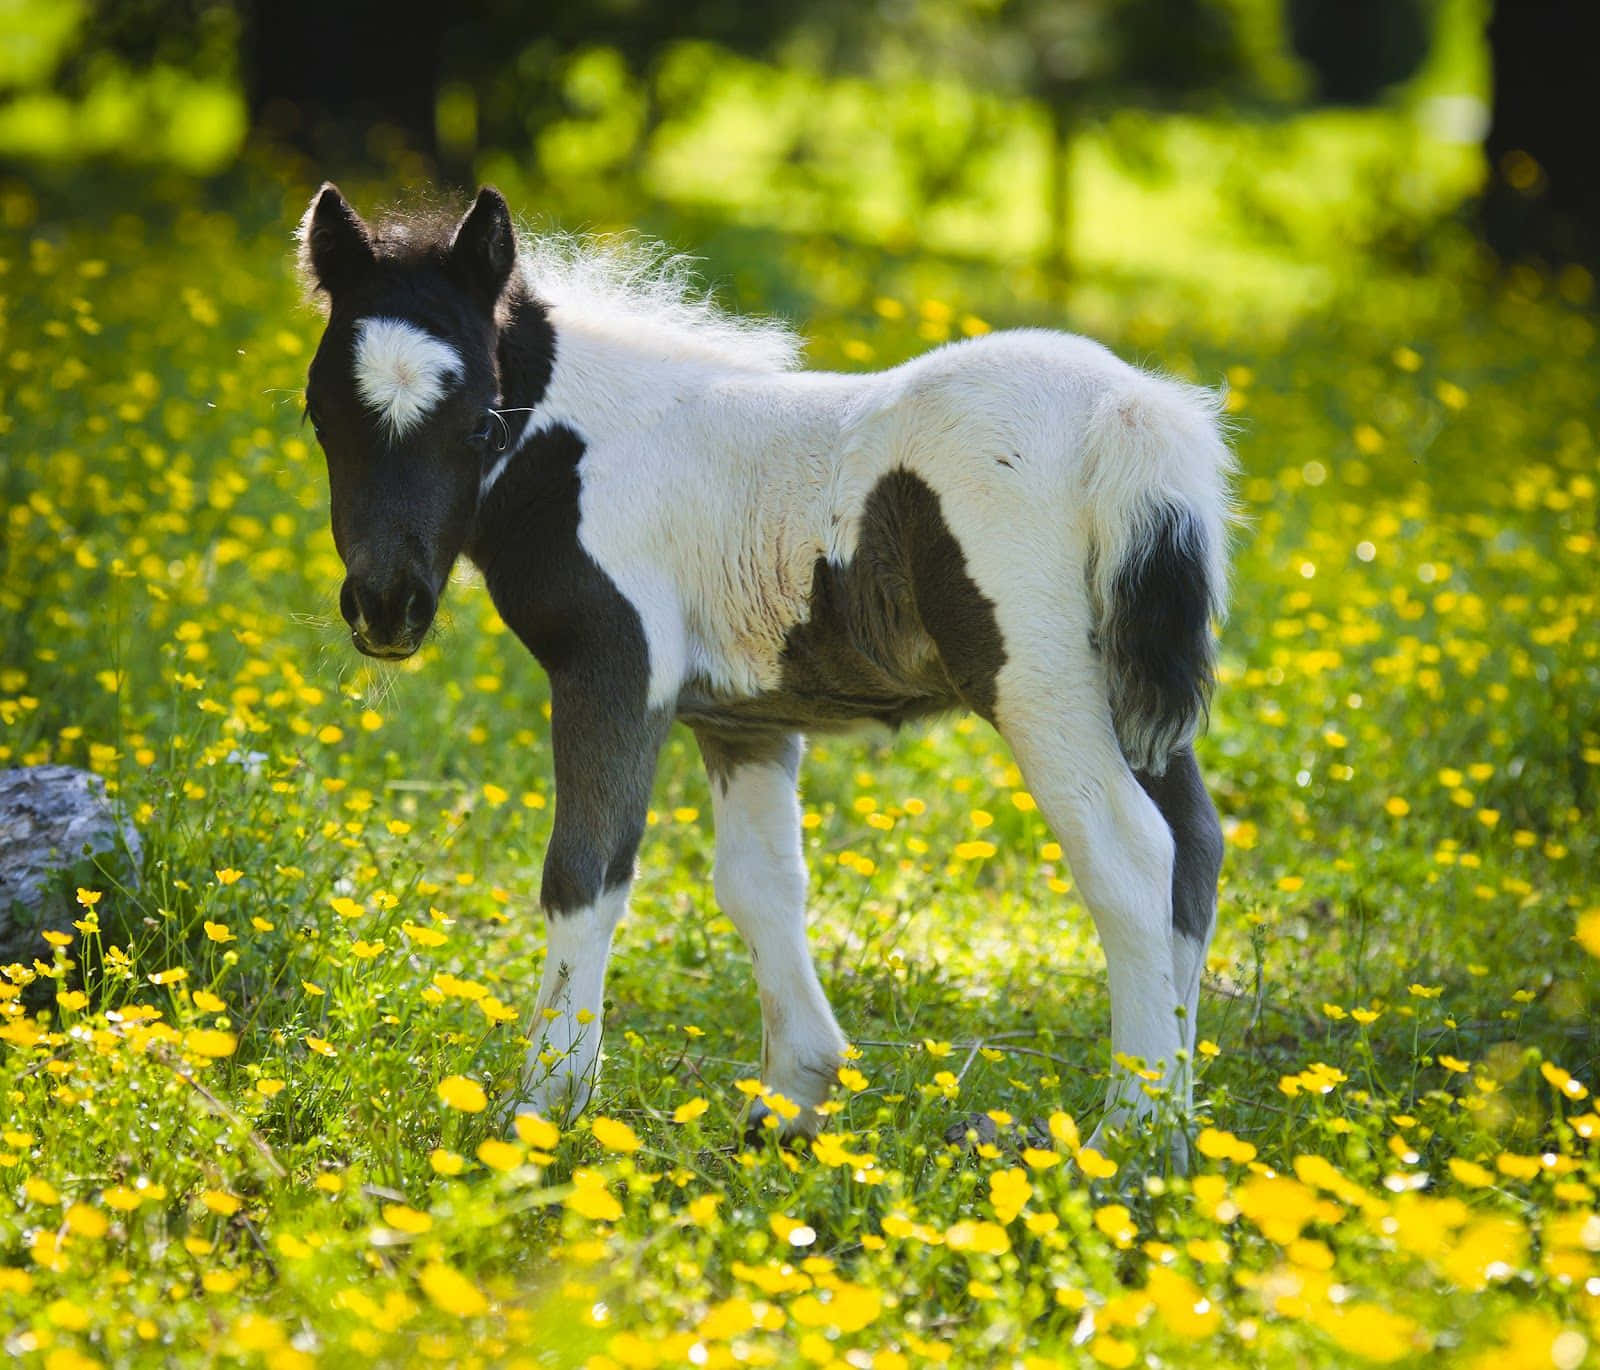 A Small Horse Standing In A Field Of Flowers